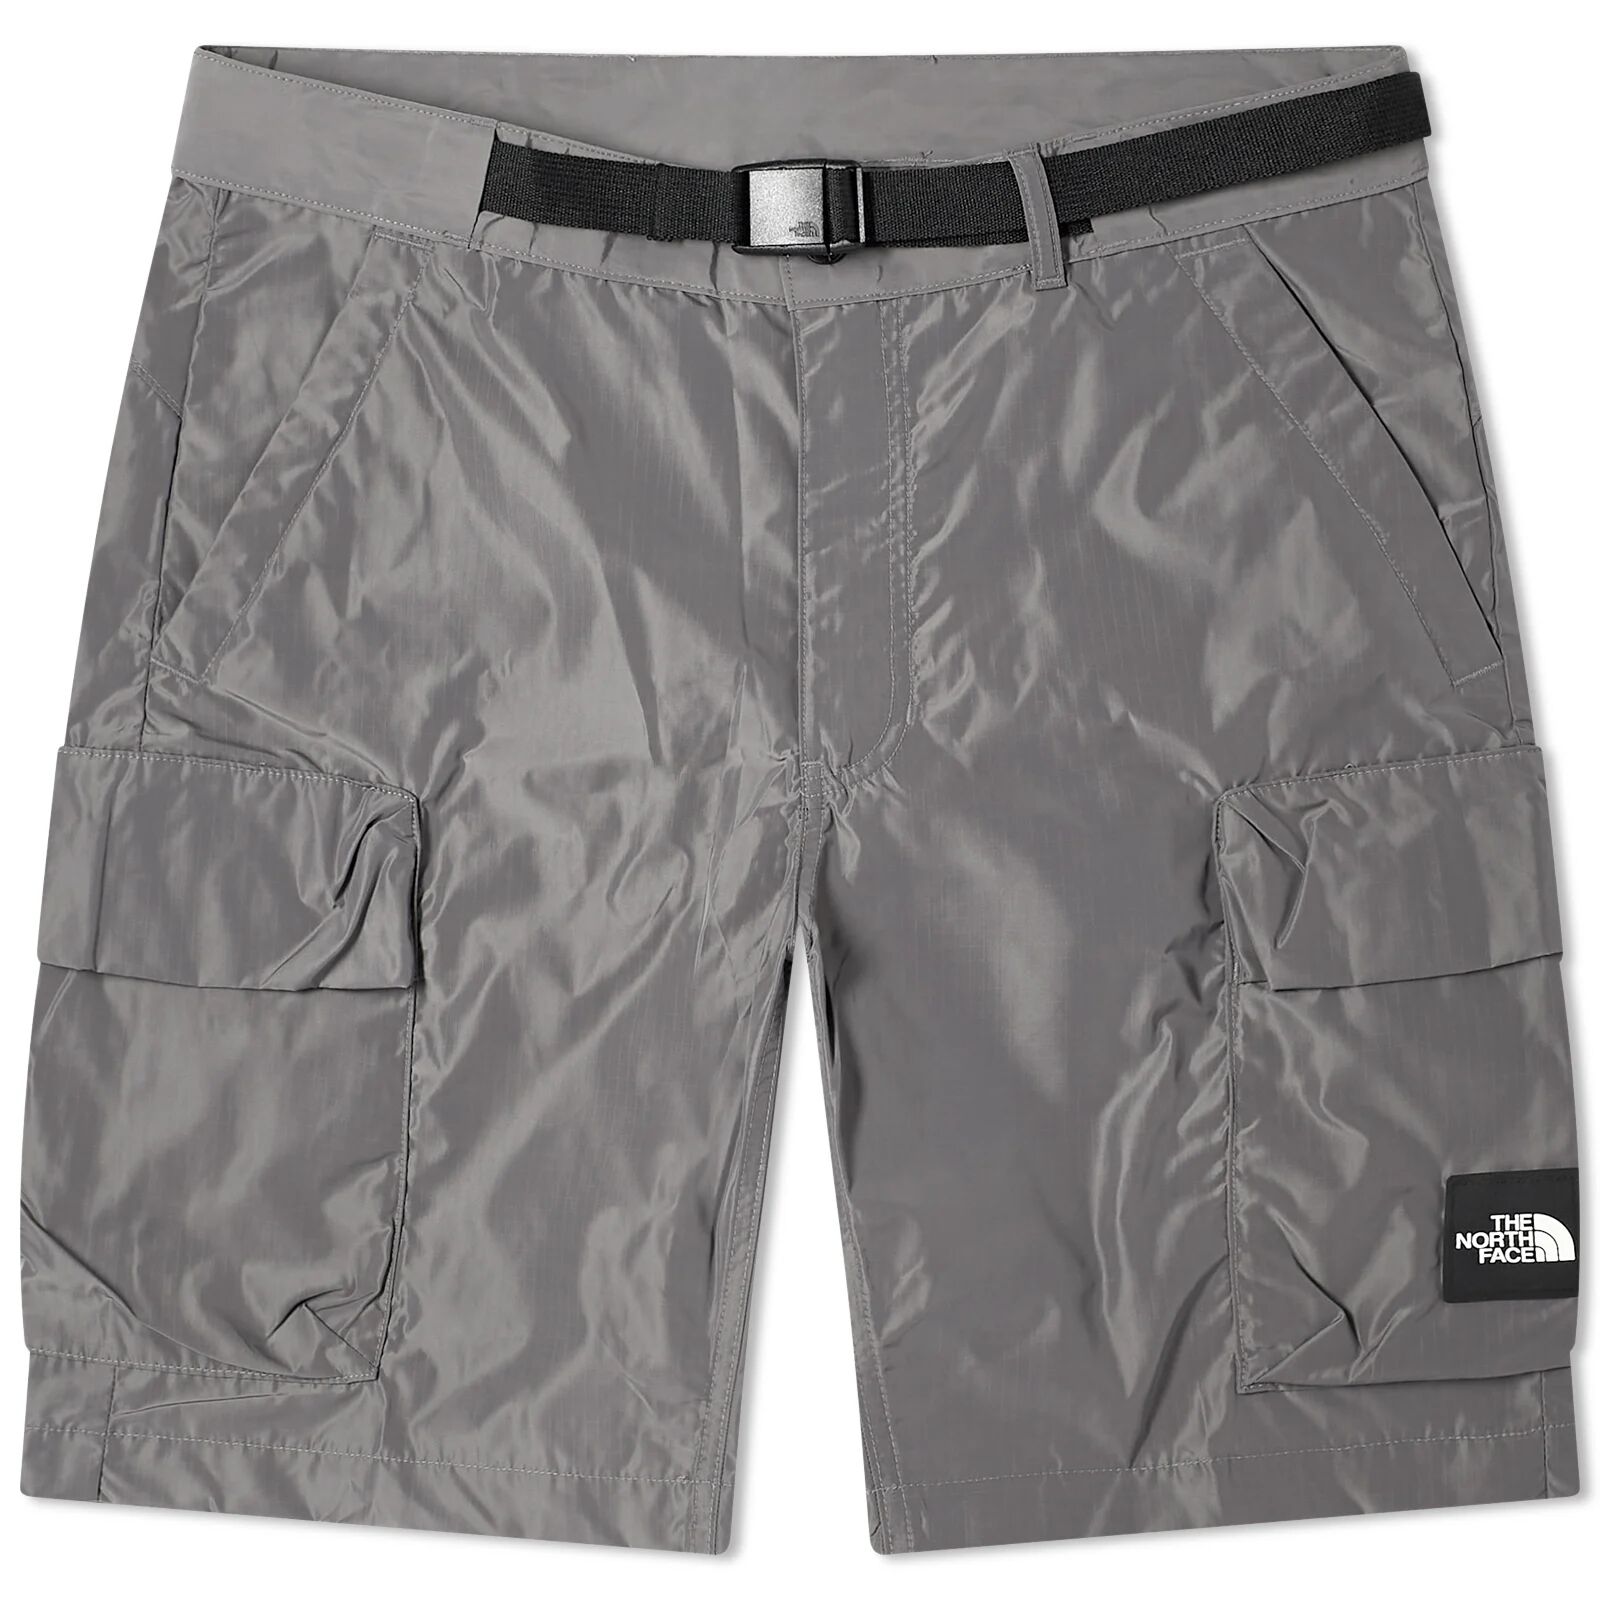 The North Face Men's NSE Cargo Pocket Shorts in Smoked Pearl, Size Medium